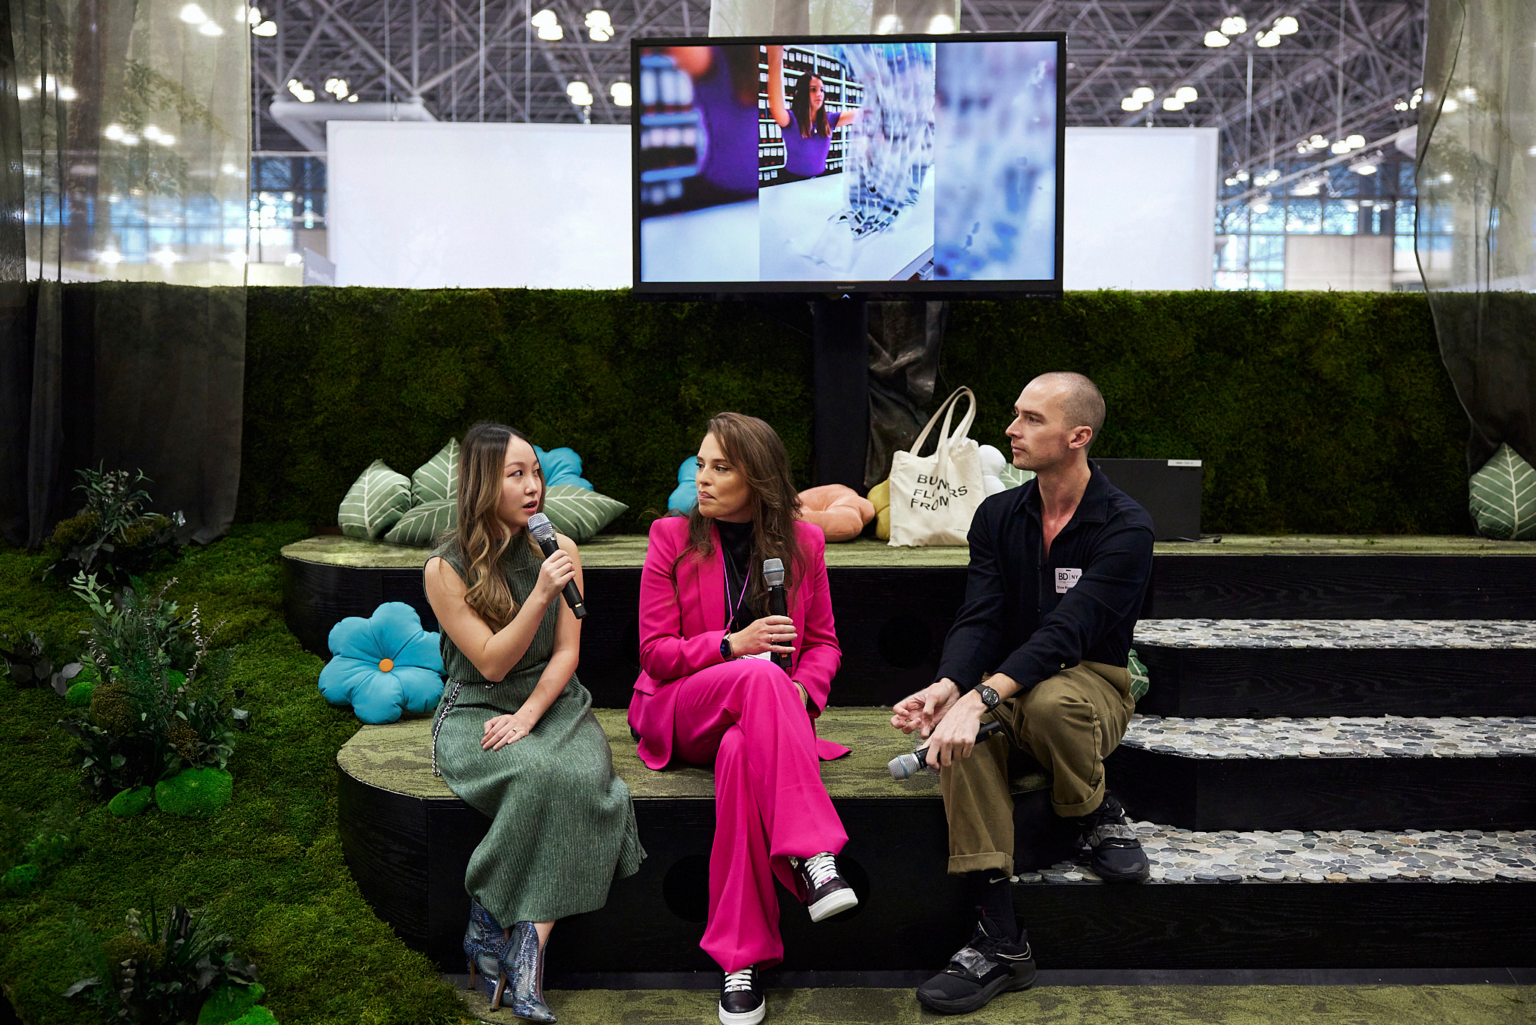 Two women and one man sitting in a custom booth delivering a presentation, booth designed with moss and flowers